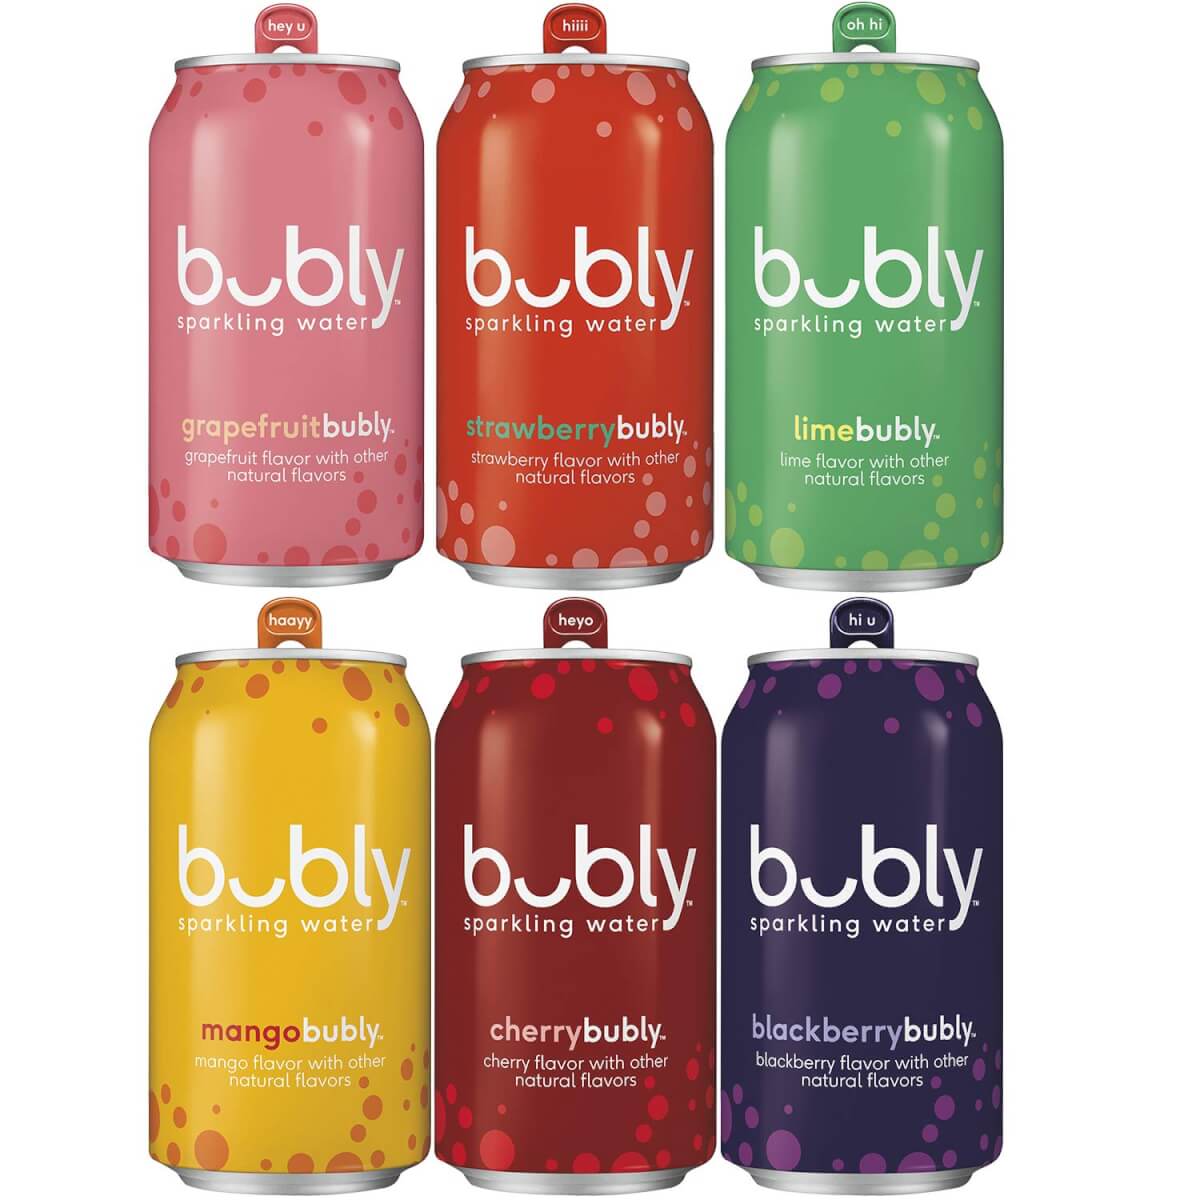 Bubly 6 Flavor Variety Pack